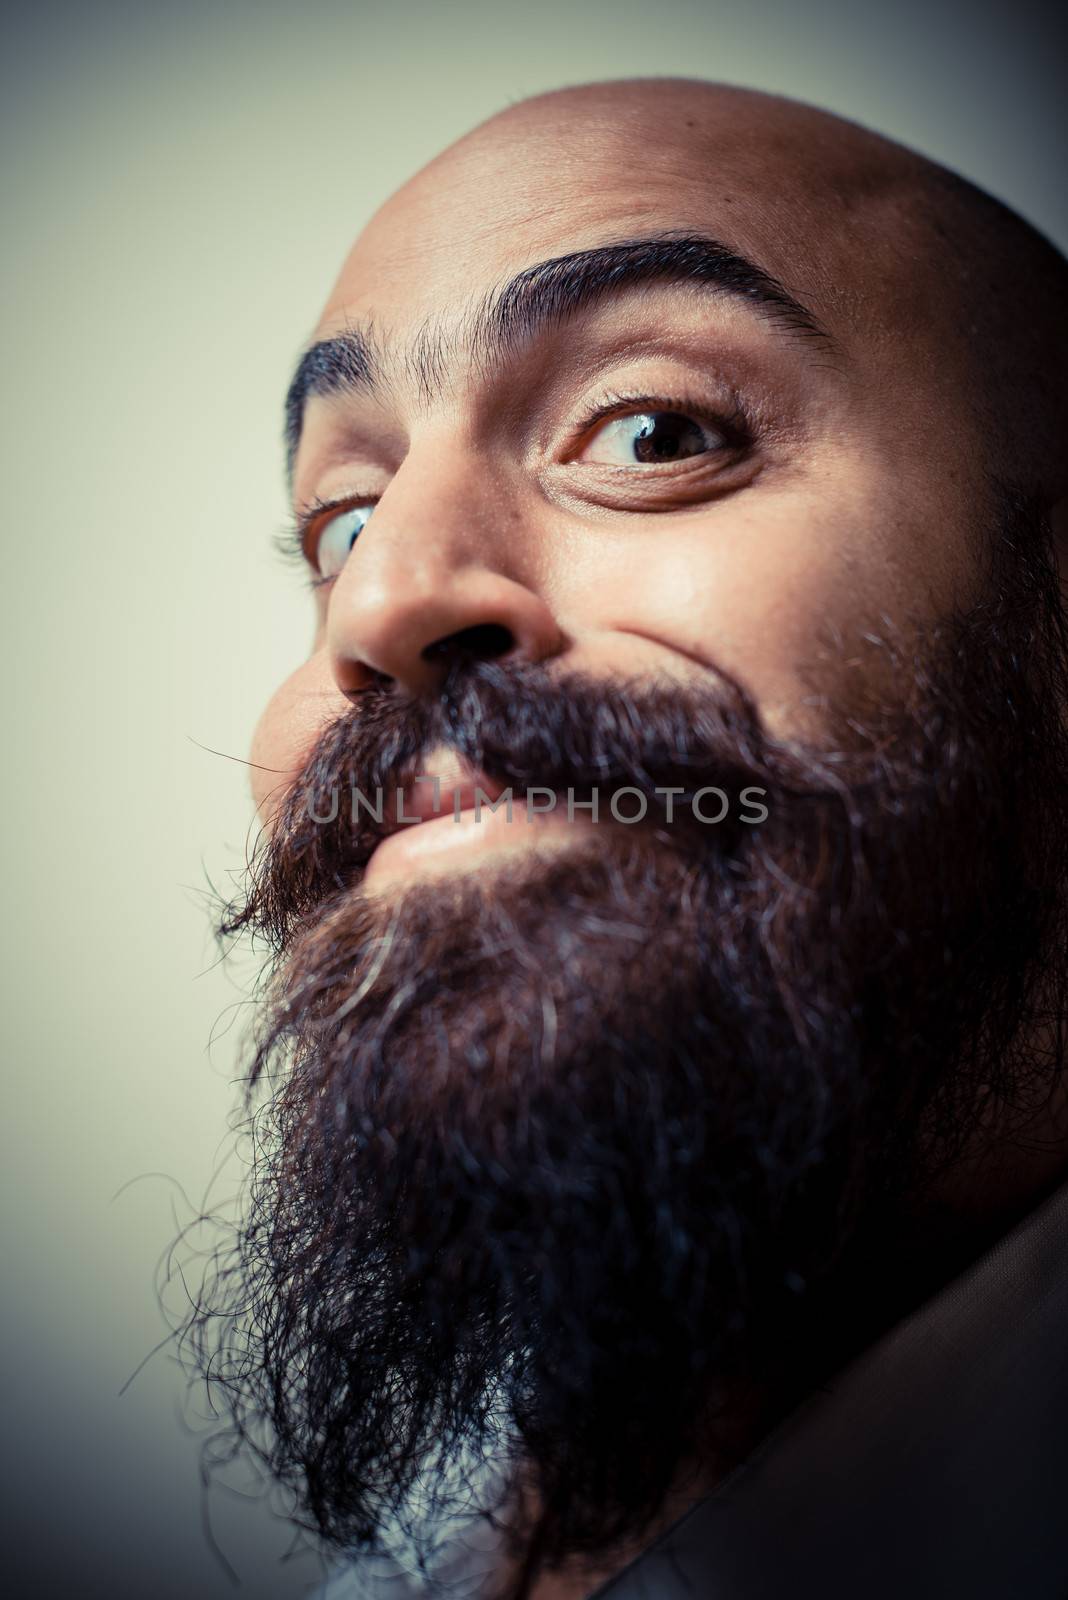 long beard and mustache man with white shirt on gray background